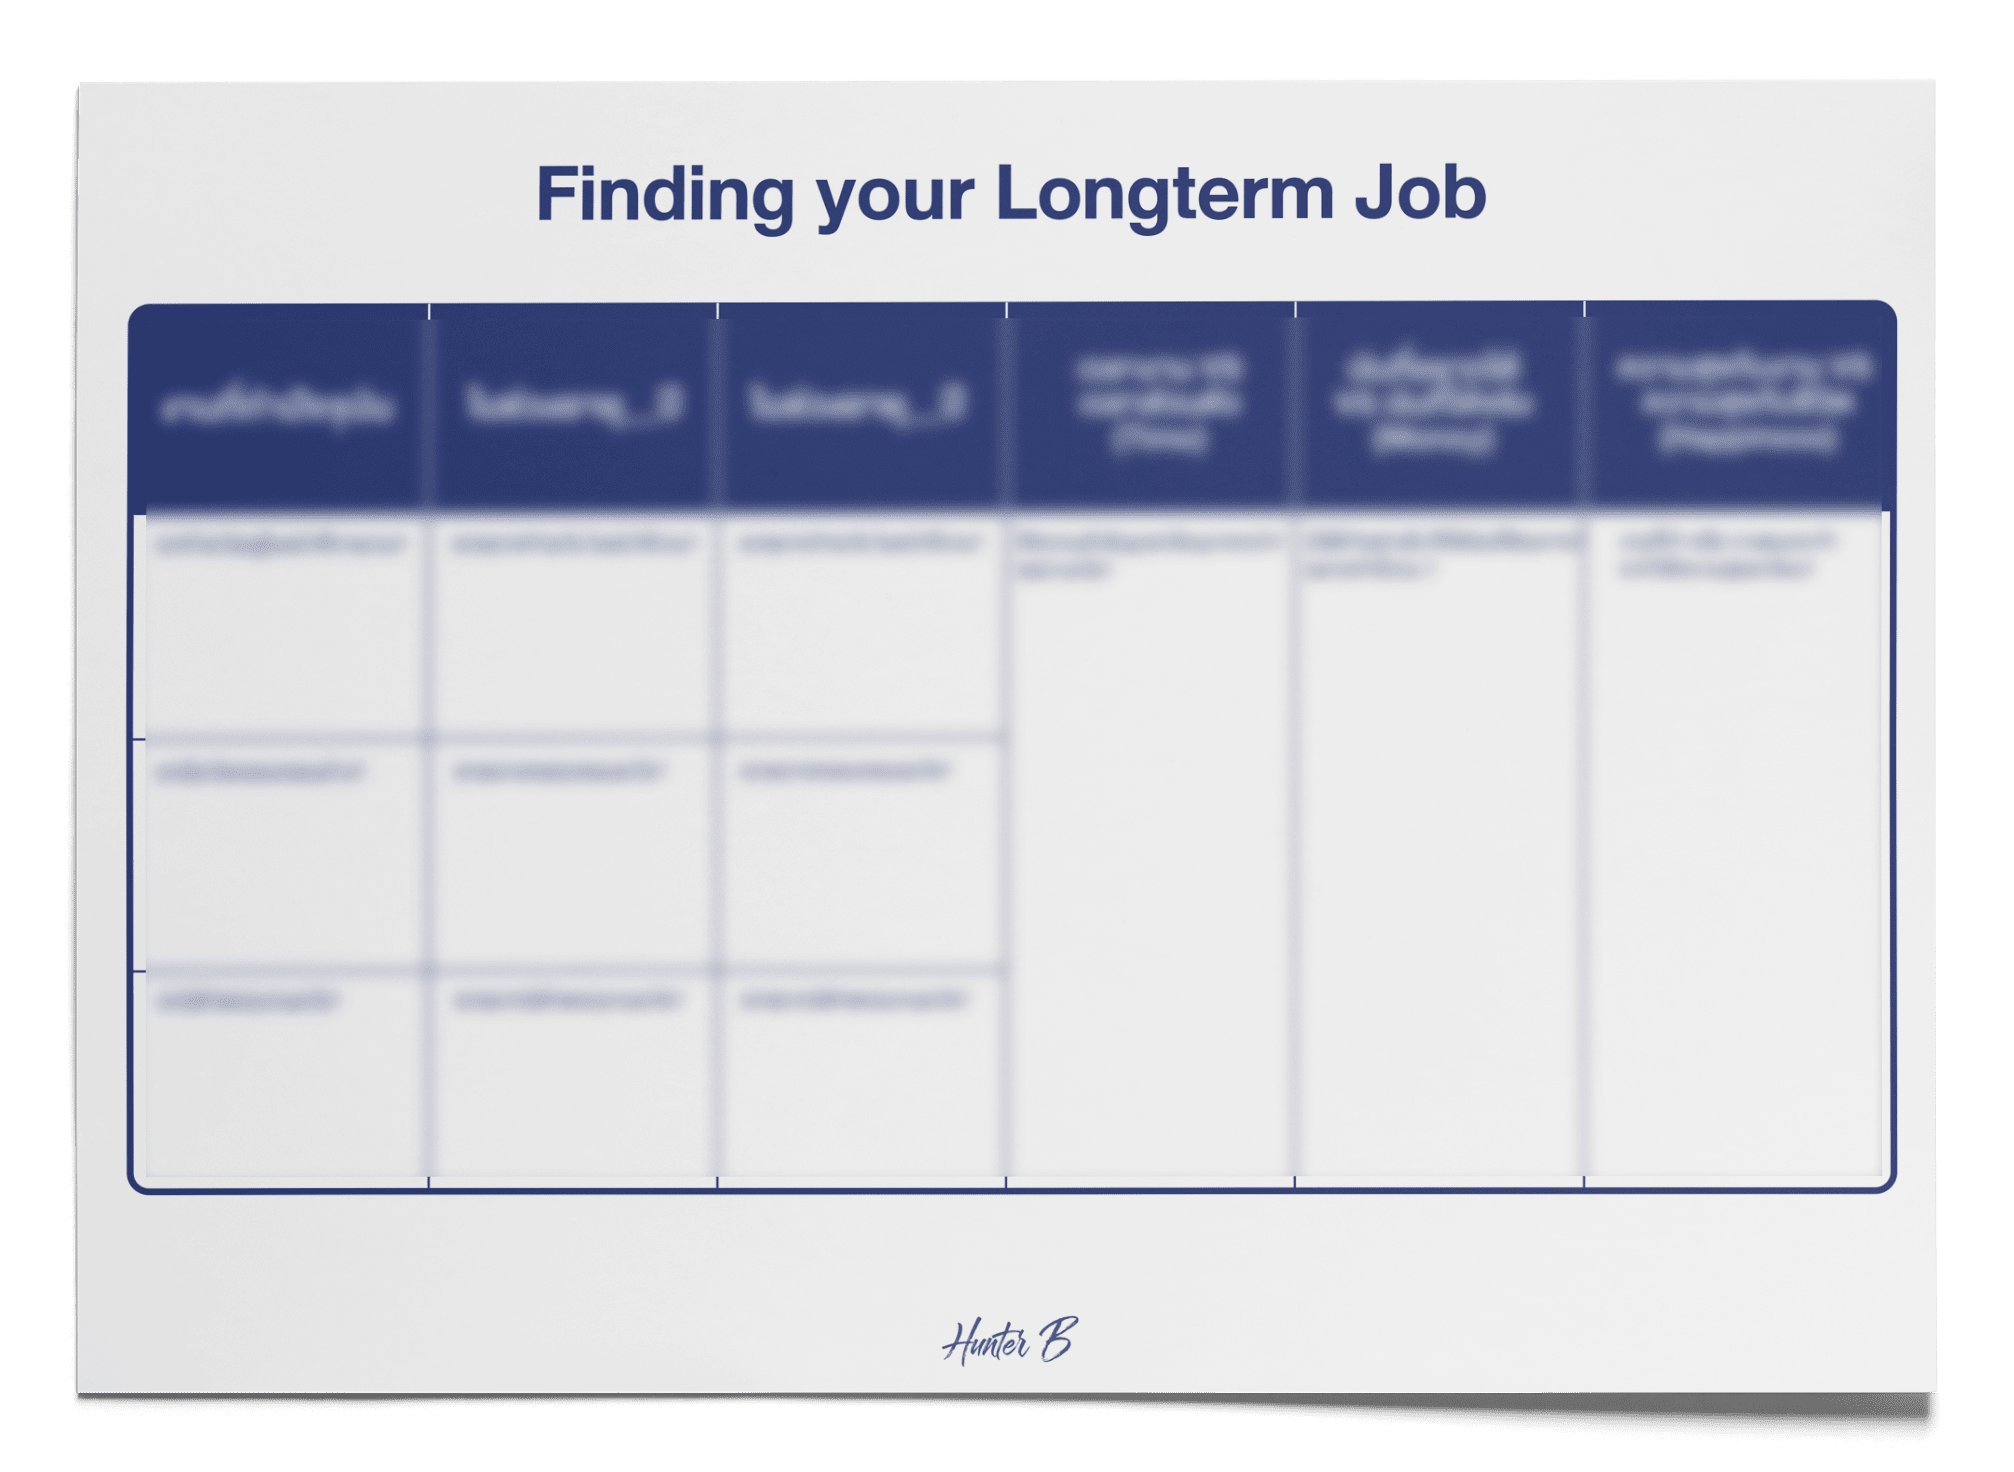 Finding your longterm job